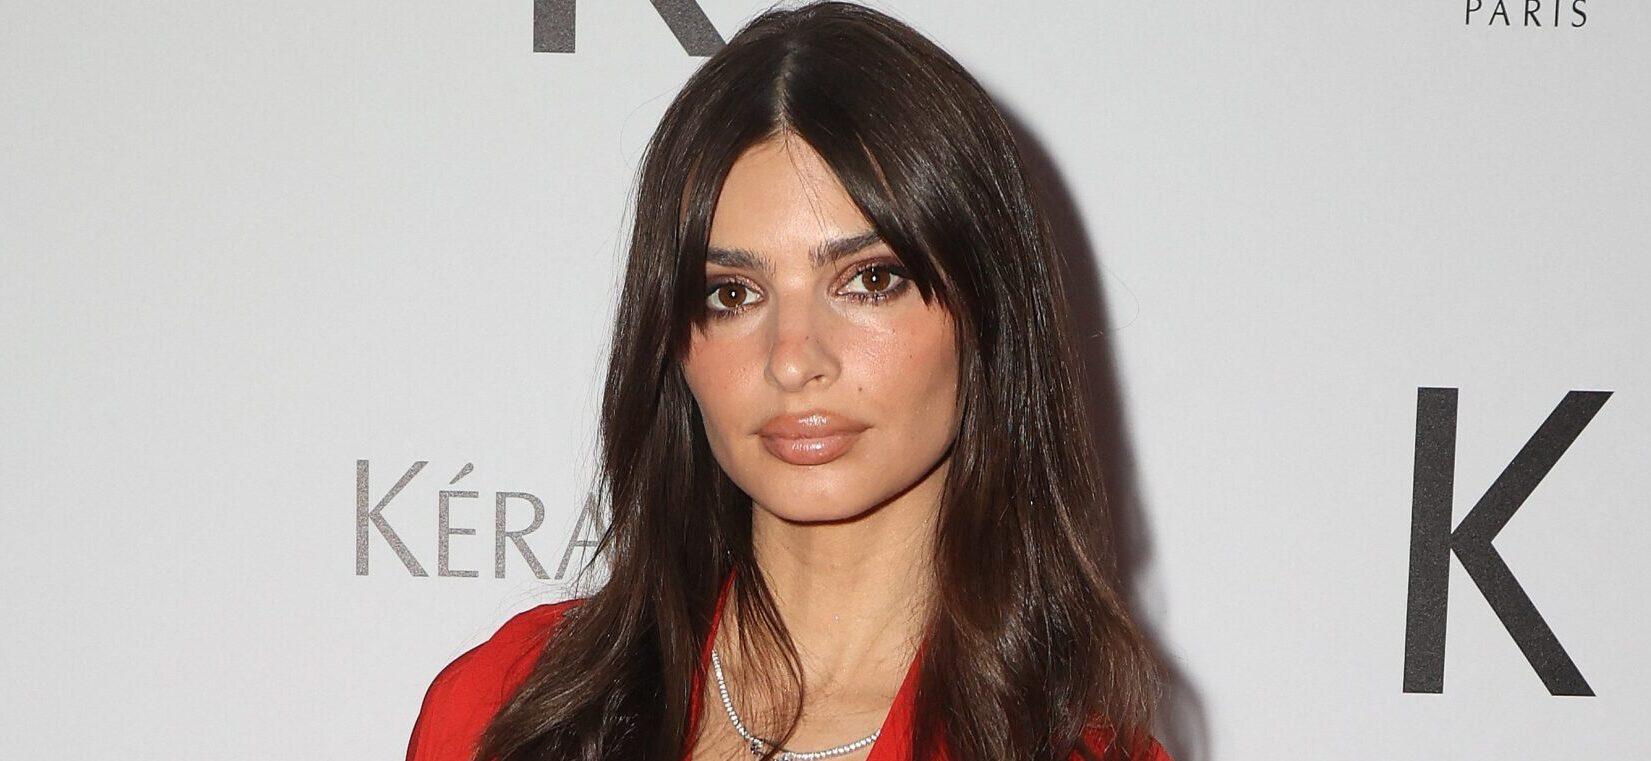 Emily Ratajkowski Leaves Fans Parched As She Debuts New Hair